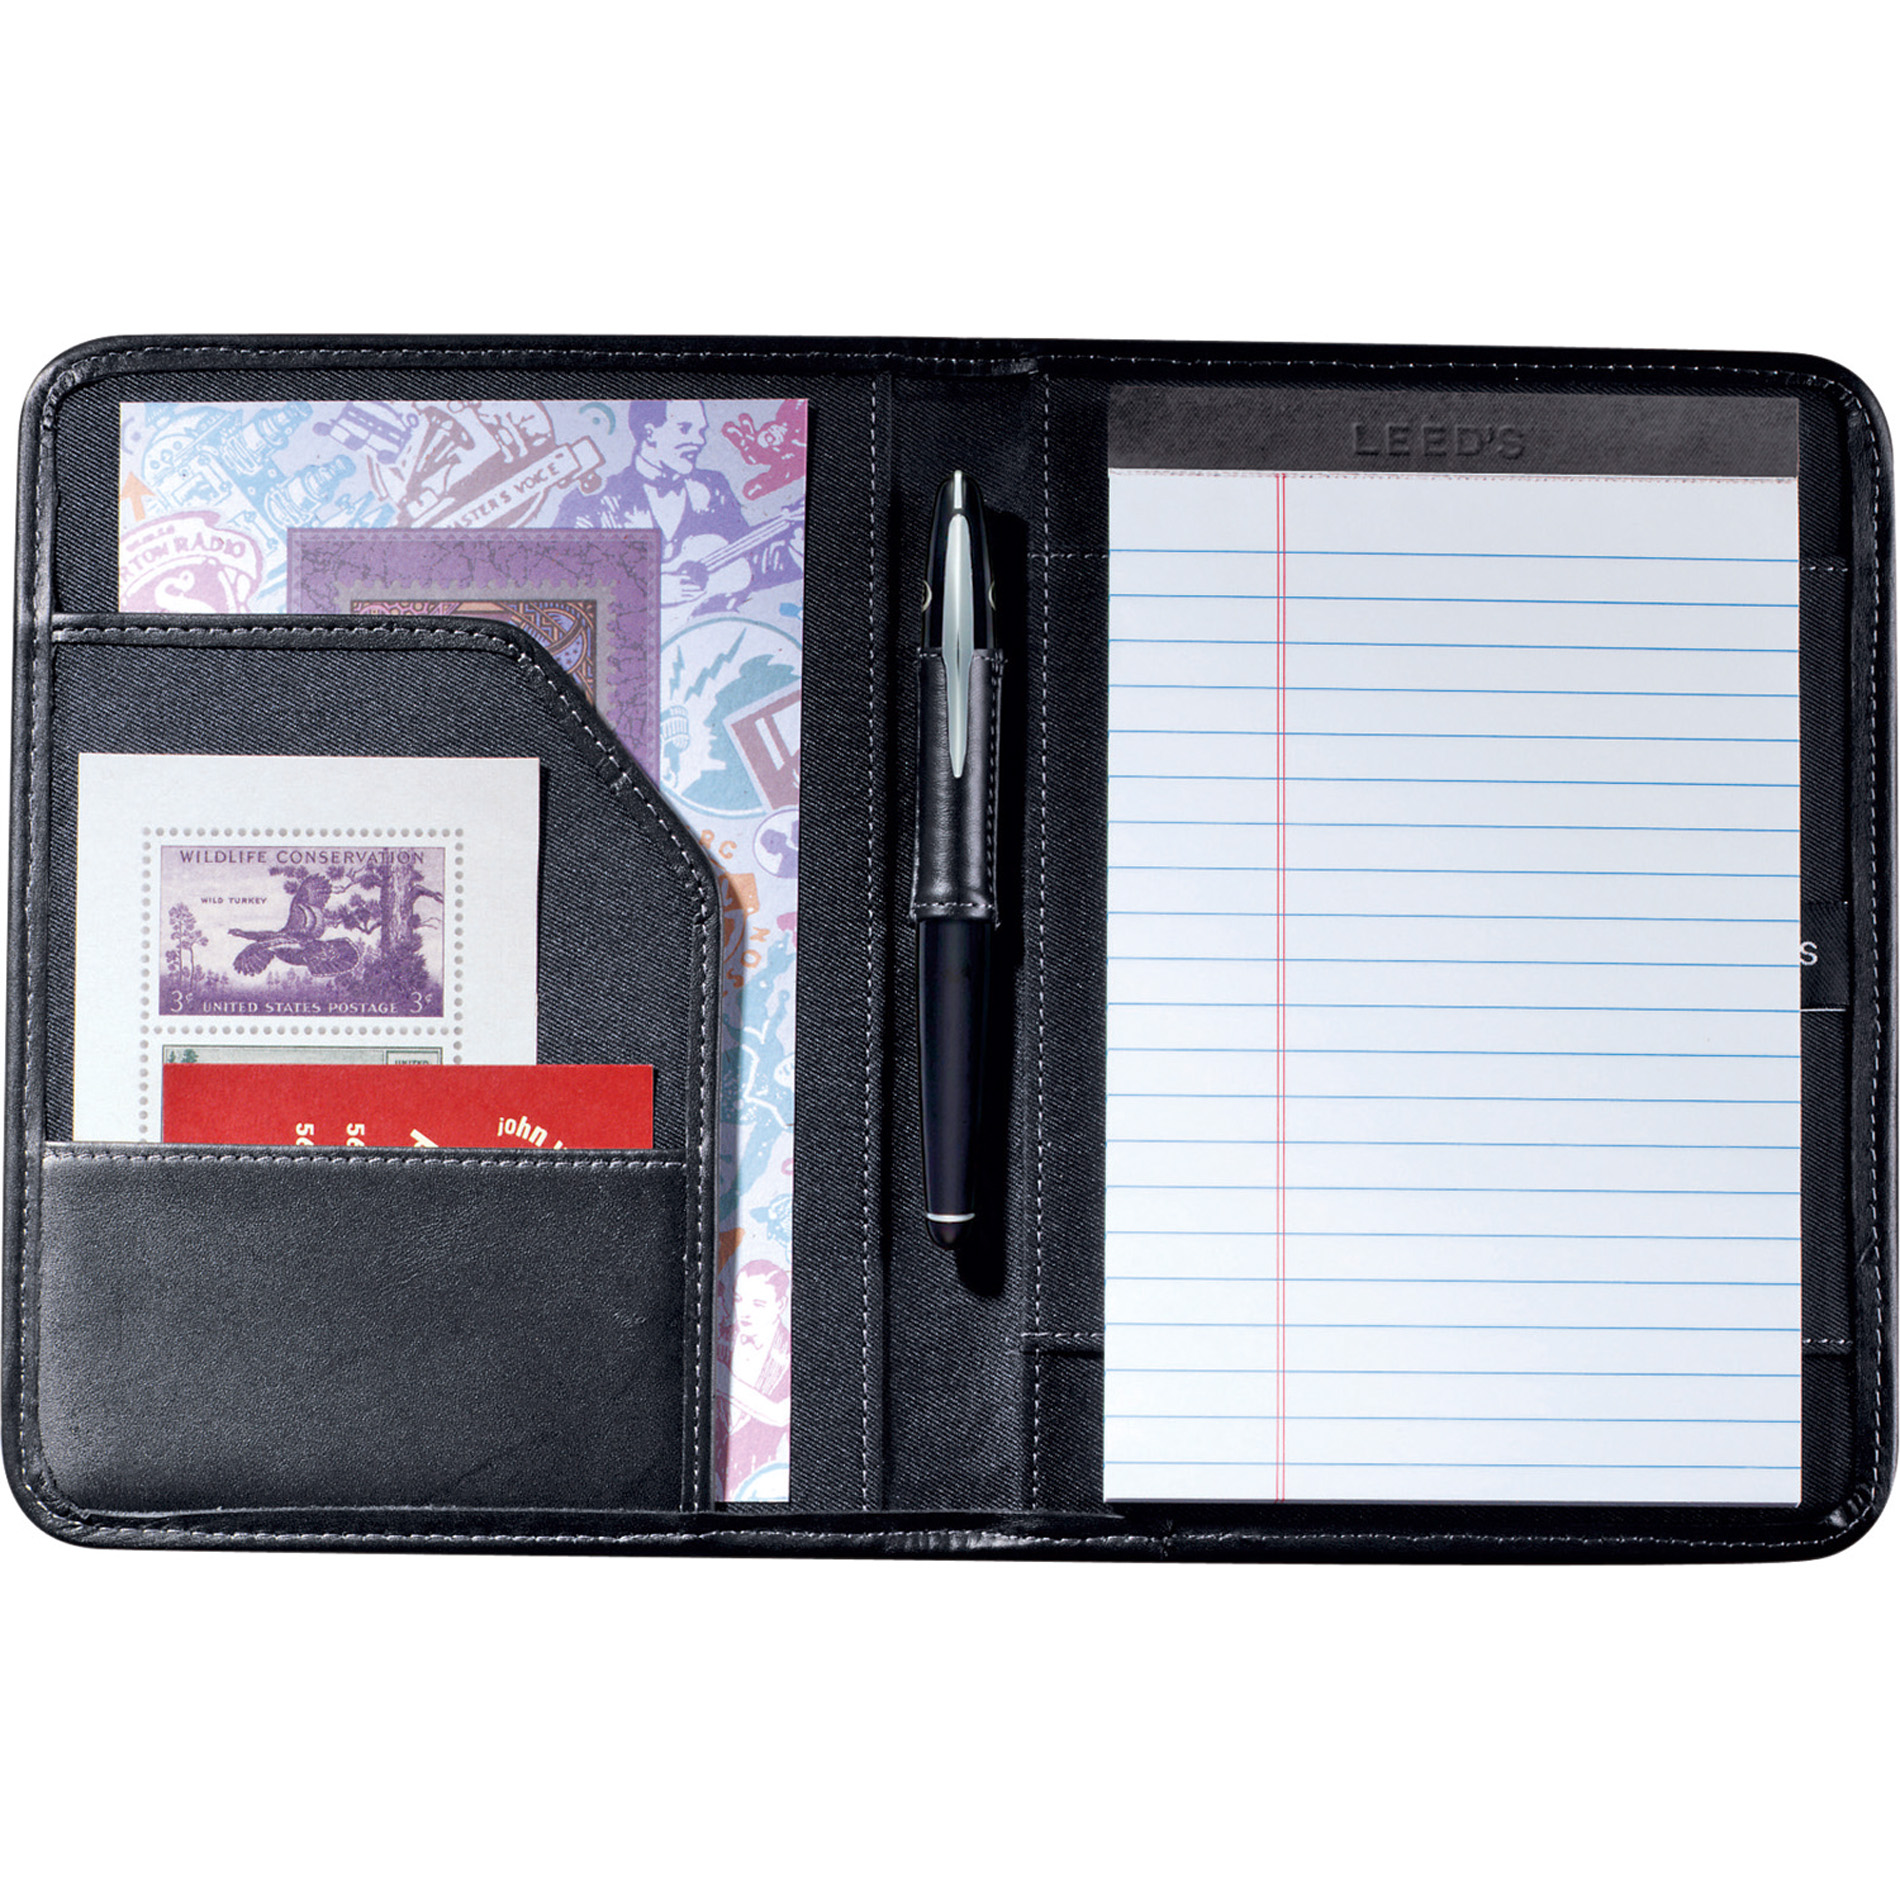 Legal Pads, Custom Personalized Letter and Junior Pads, wholesale direct